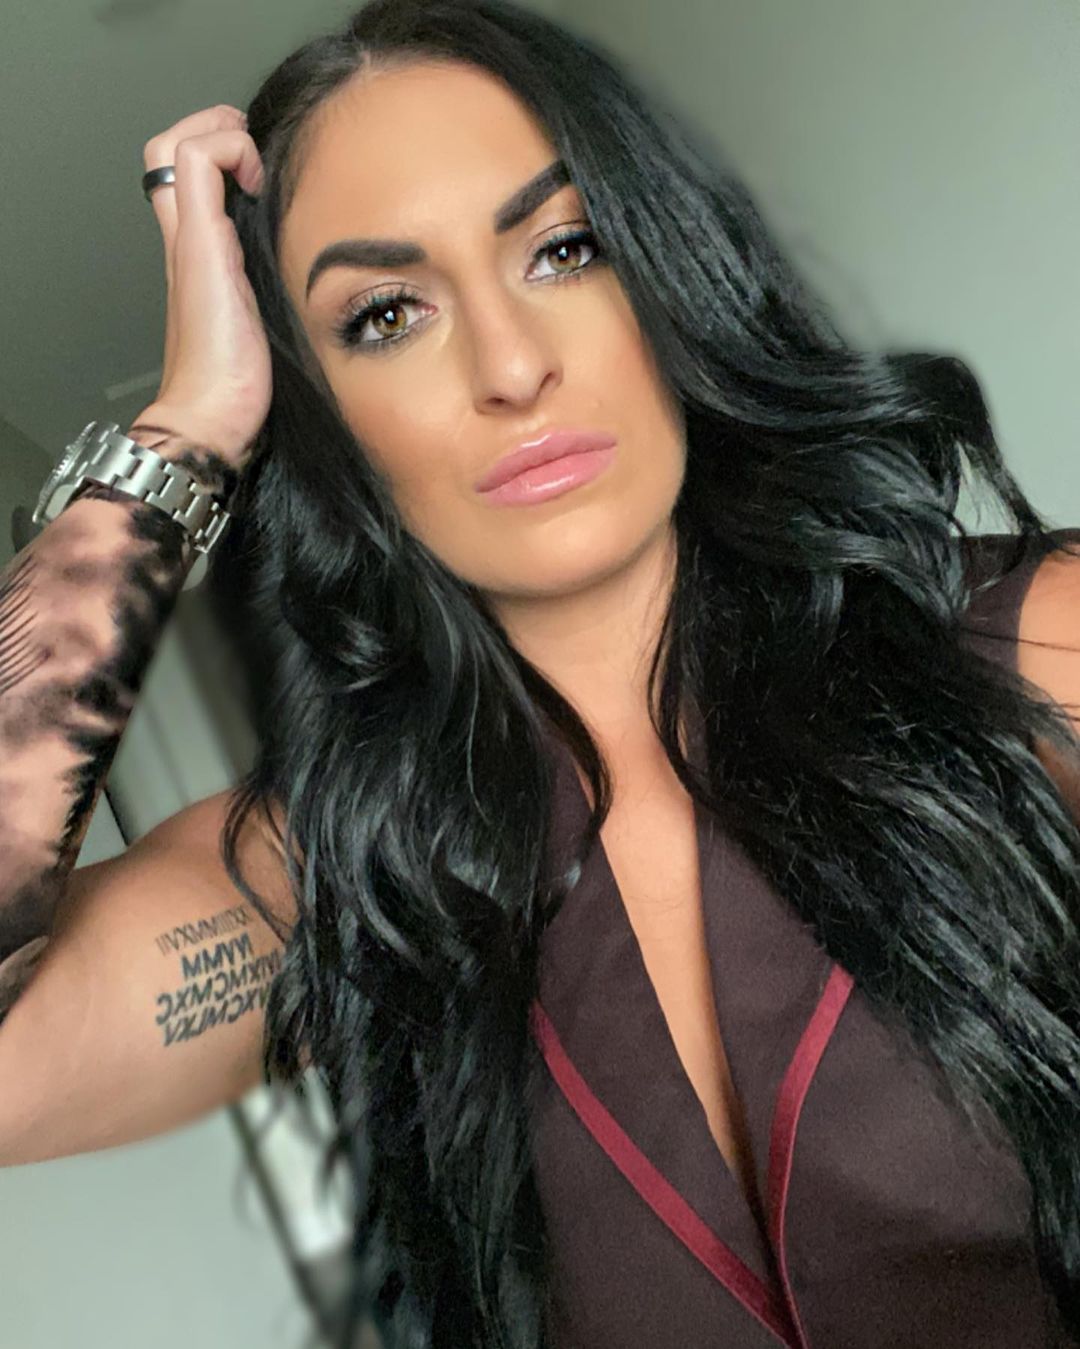 dan dragone recommends sonya deville nude pic